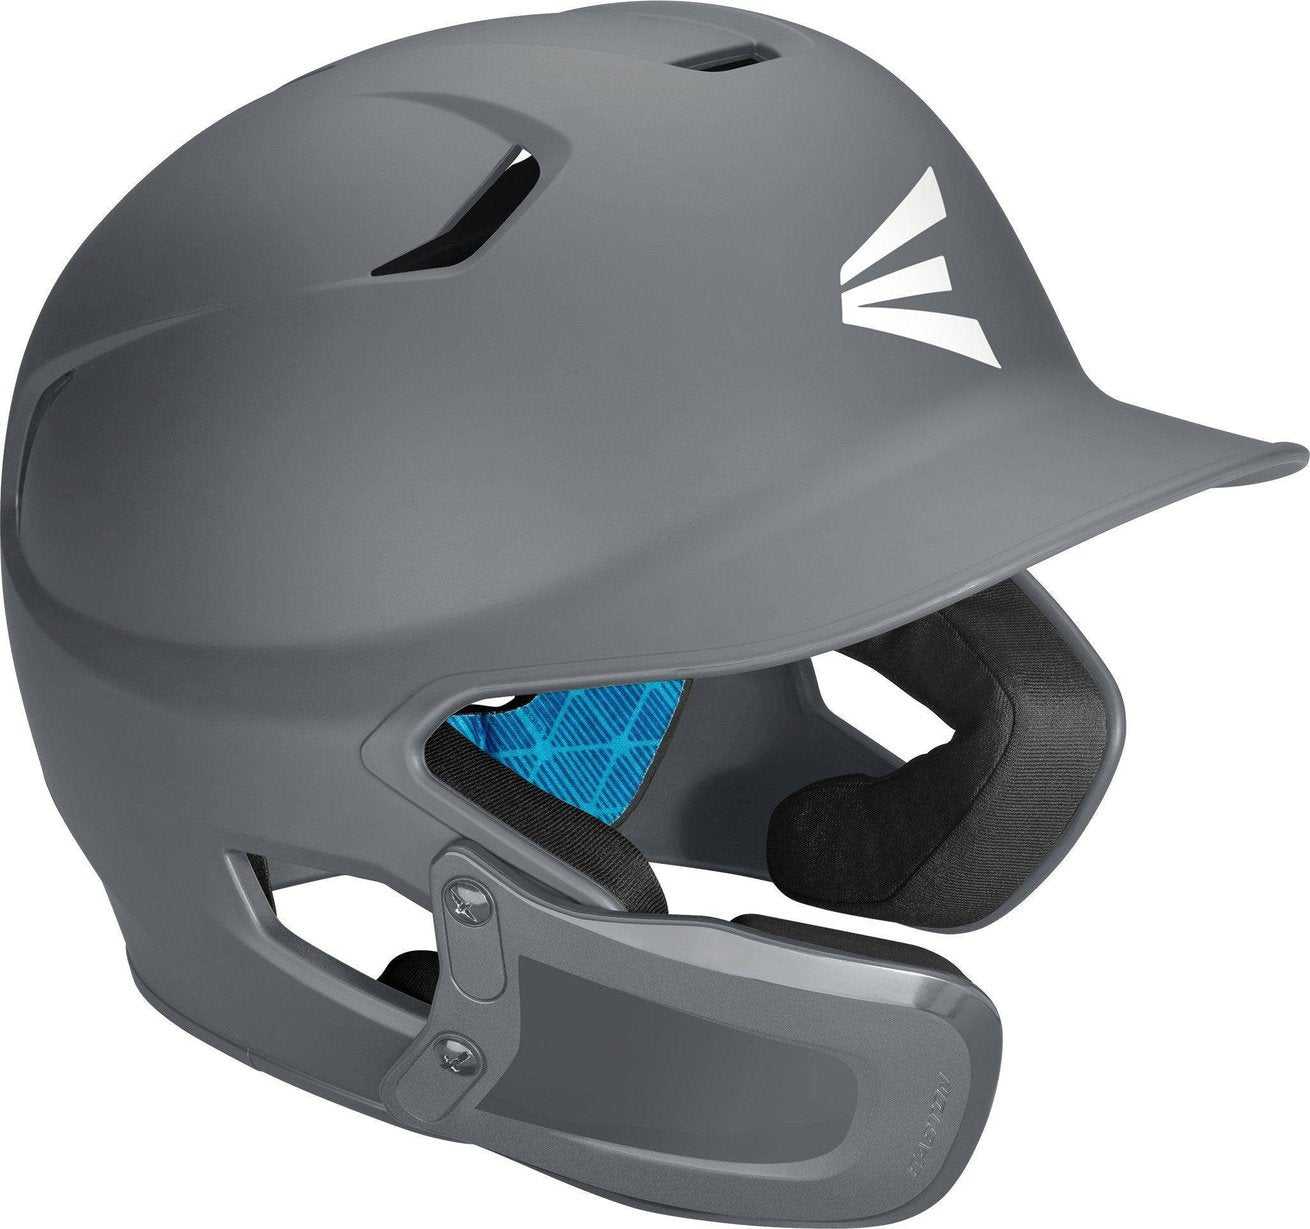 Easton Z5 2.0 Solid Batting Helmet with Universal Jaw Guard - Charcoal - HIT A Double